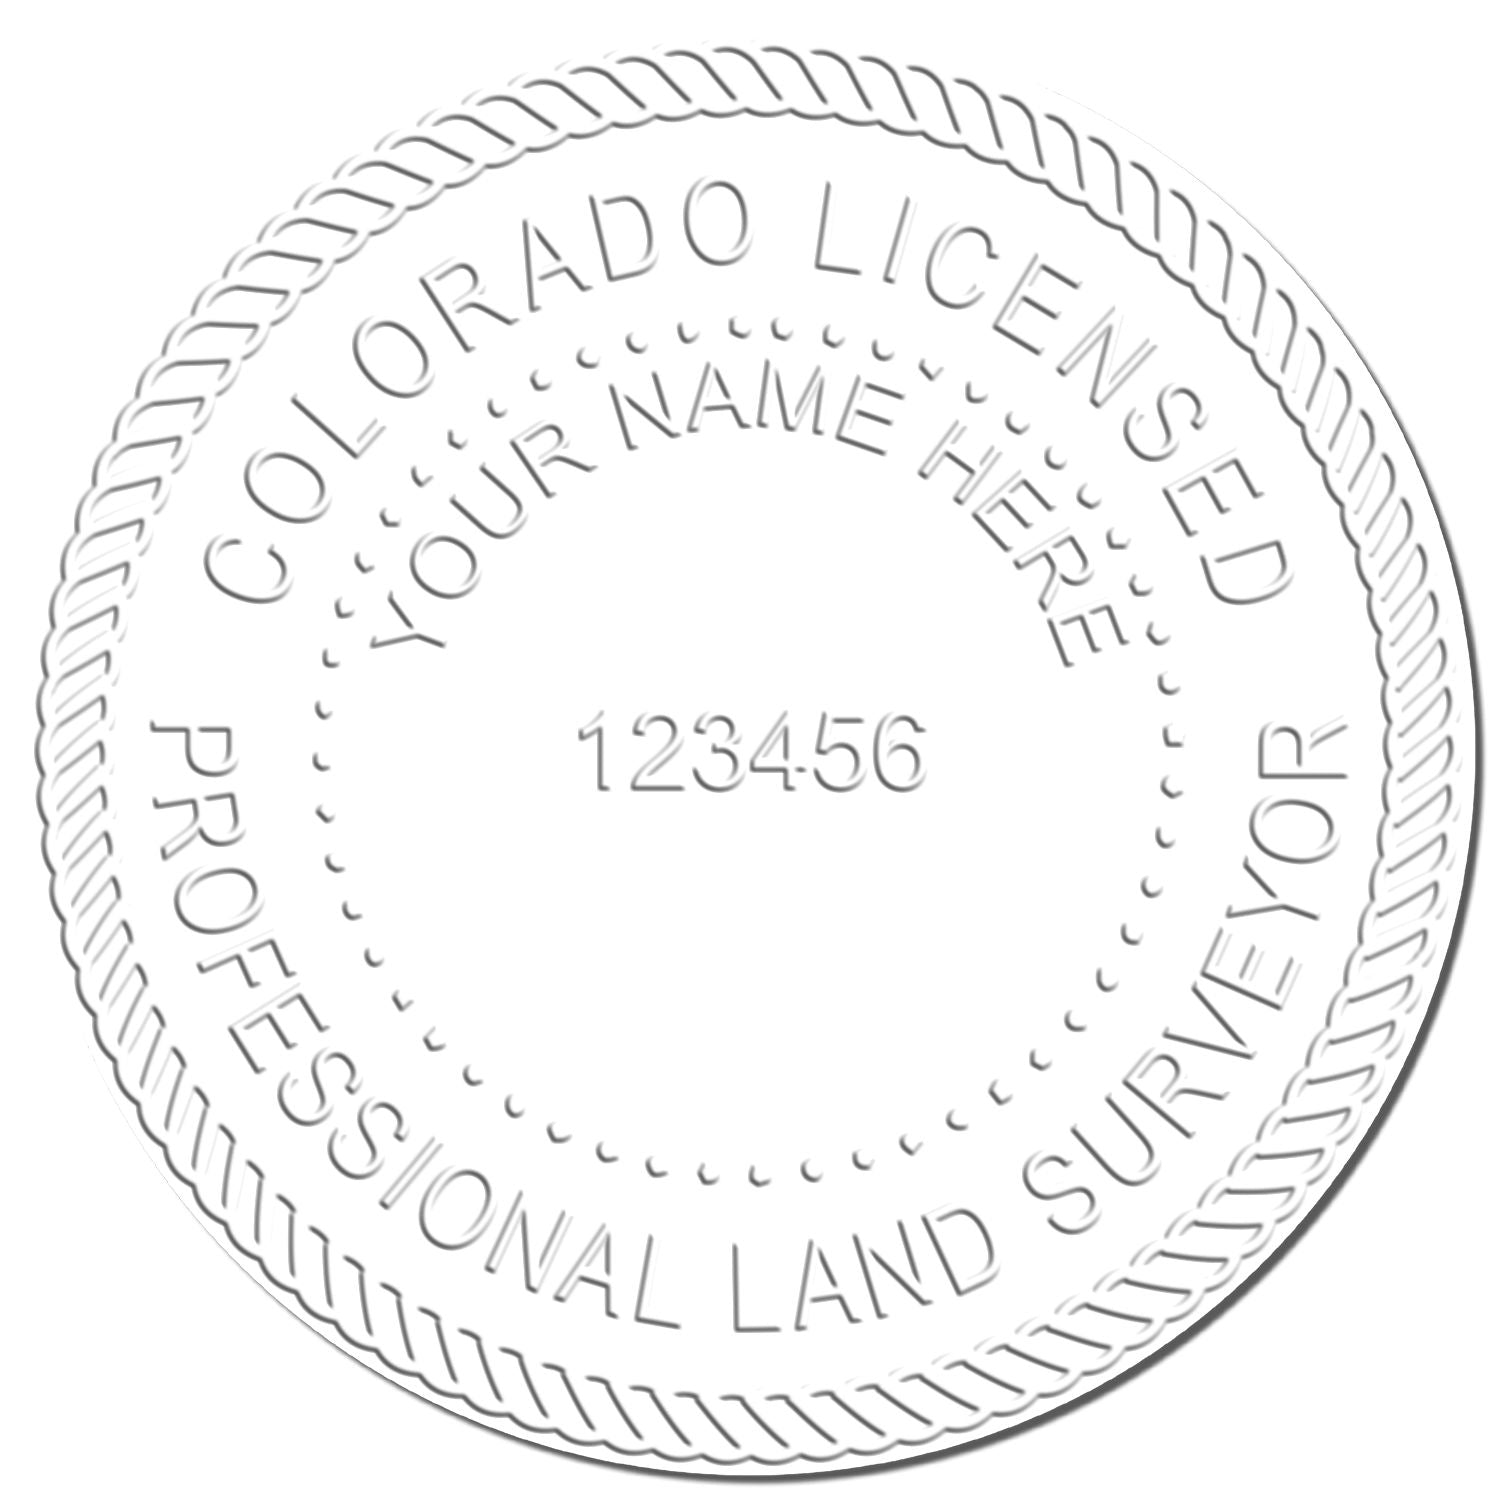 The main image for the Long Reach Colorado Land Surveyor Seal depicting a sample of the imprint and electronic files